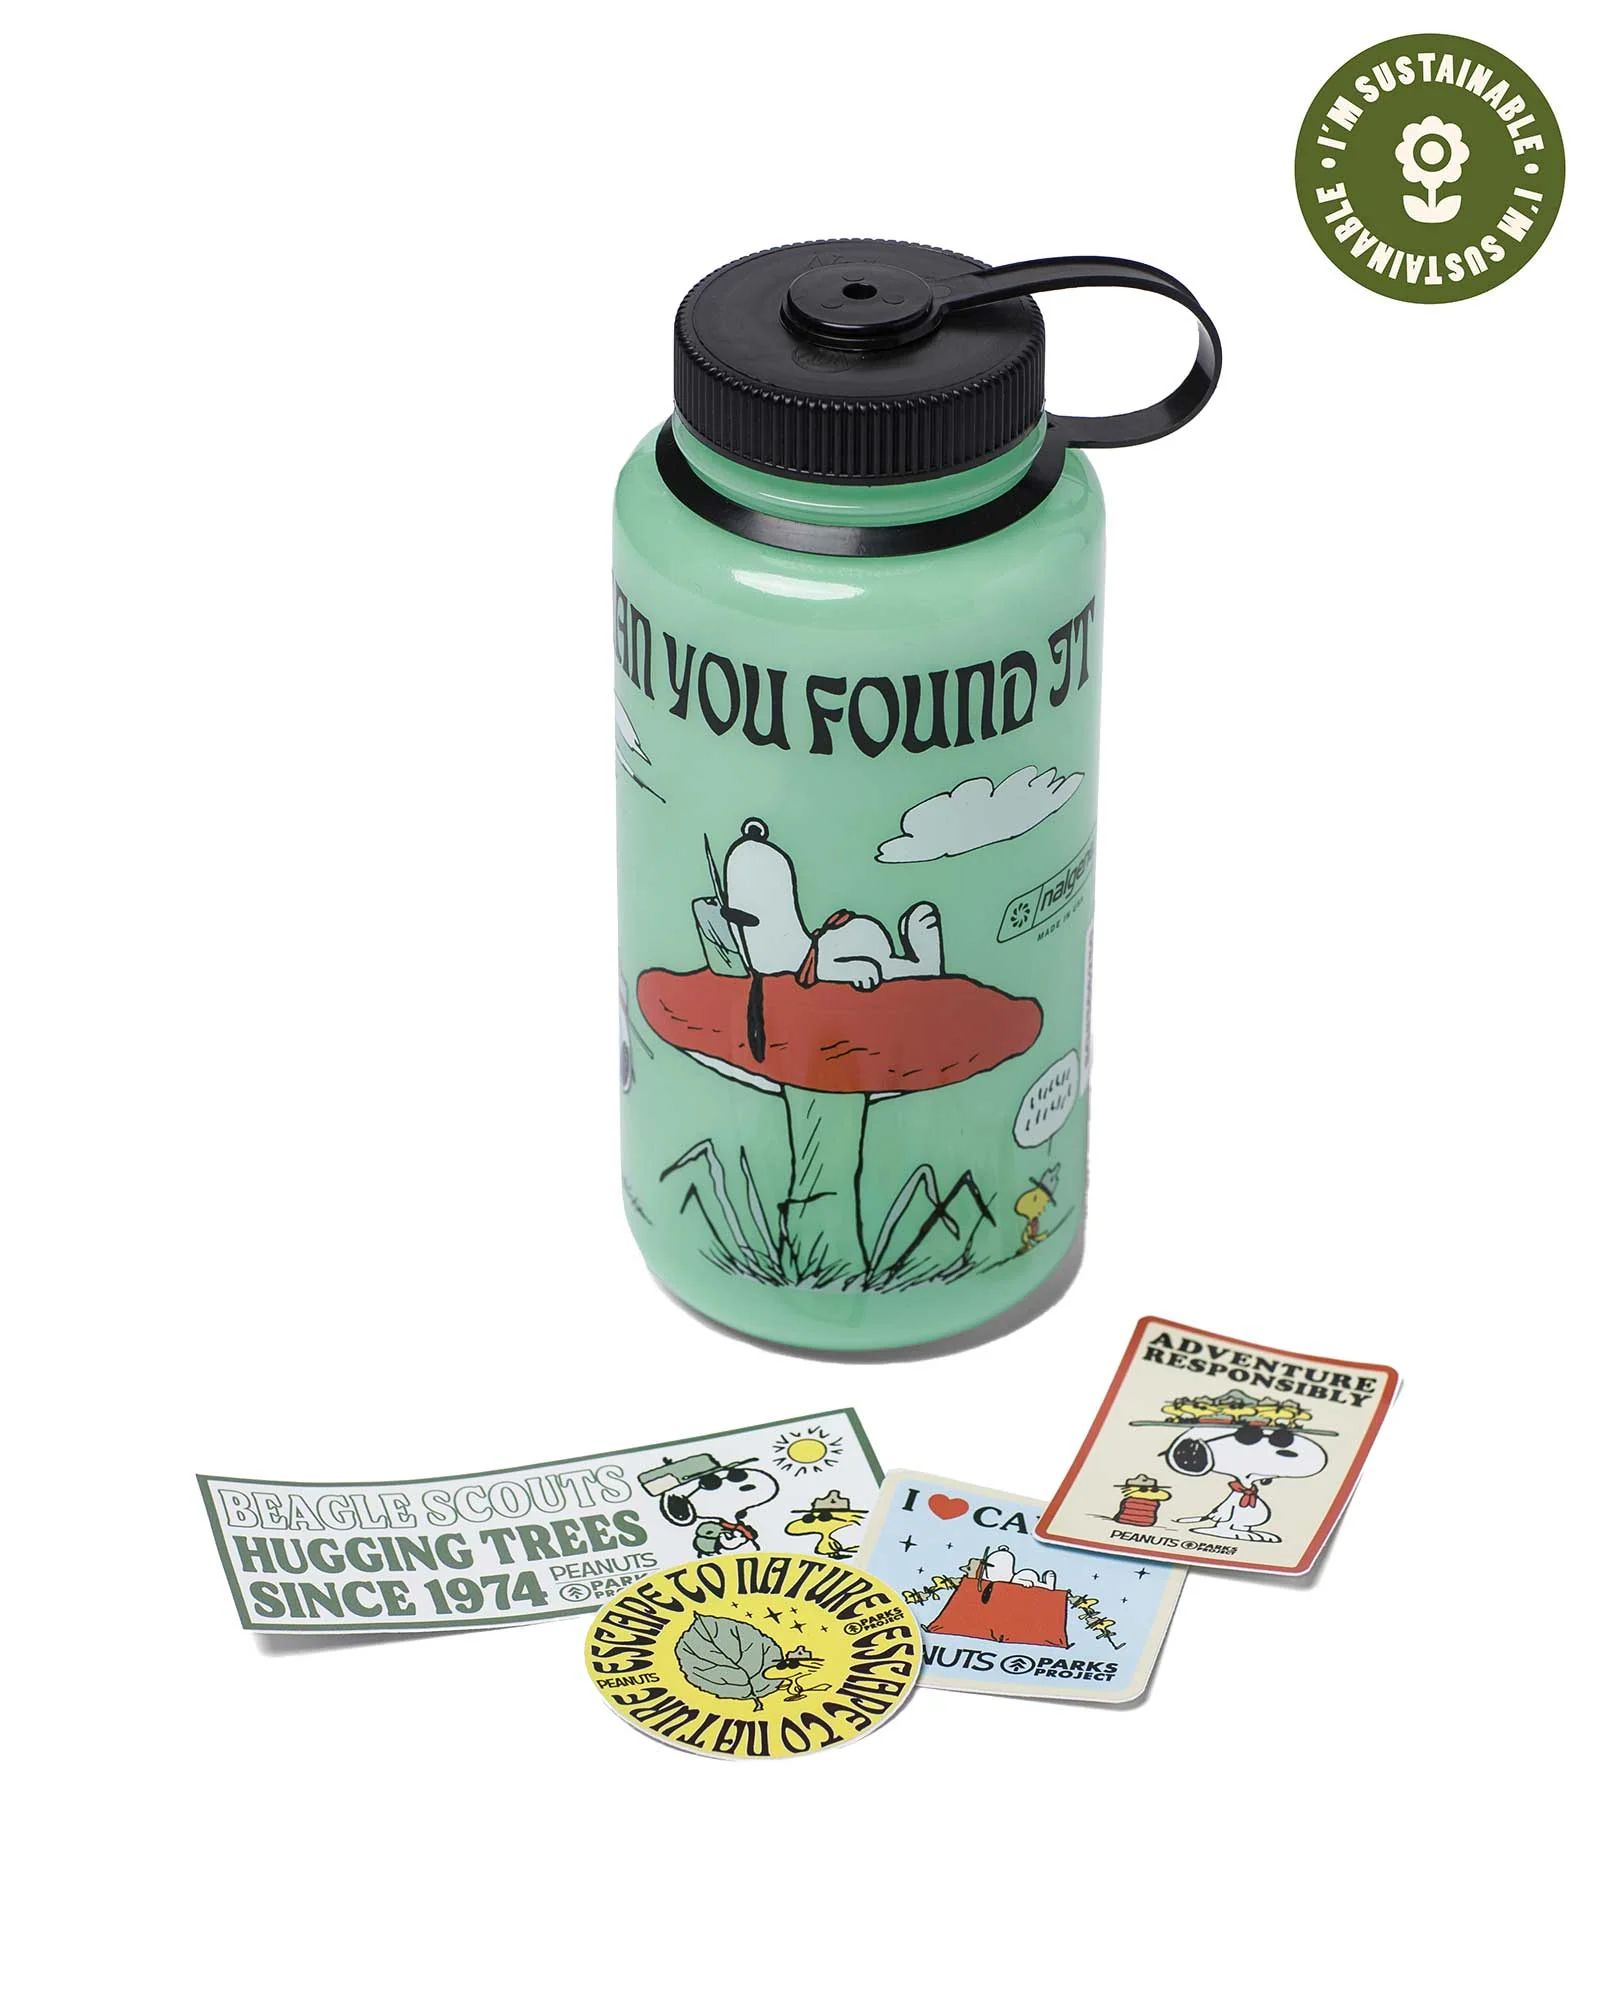 Peanuts x Parks Project Recycled Water Bottle and Sticker Pack | Parks Project